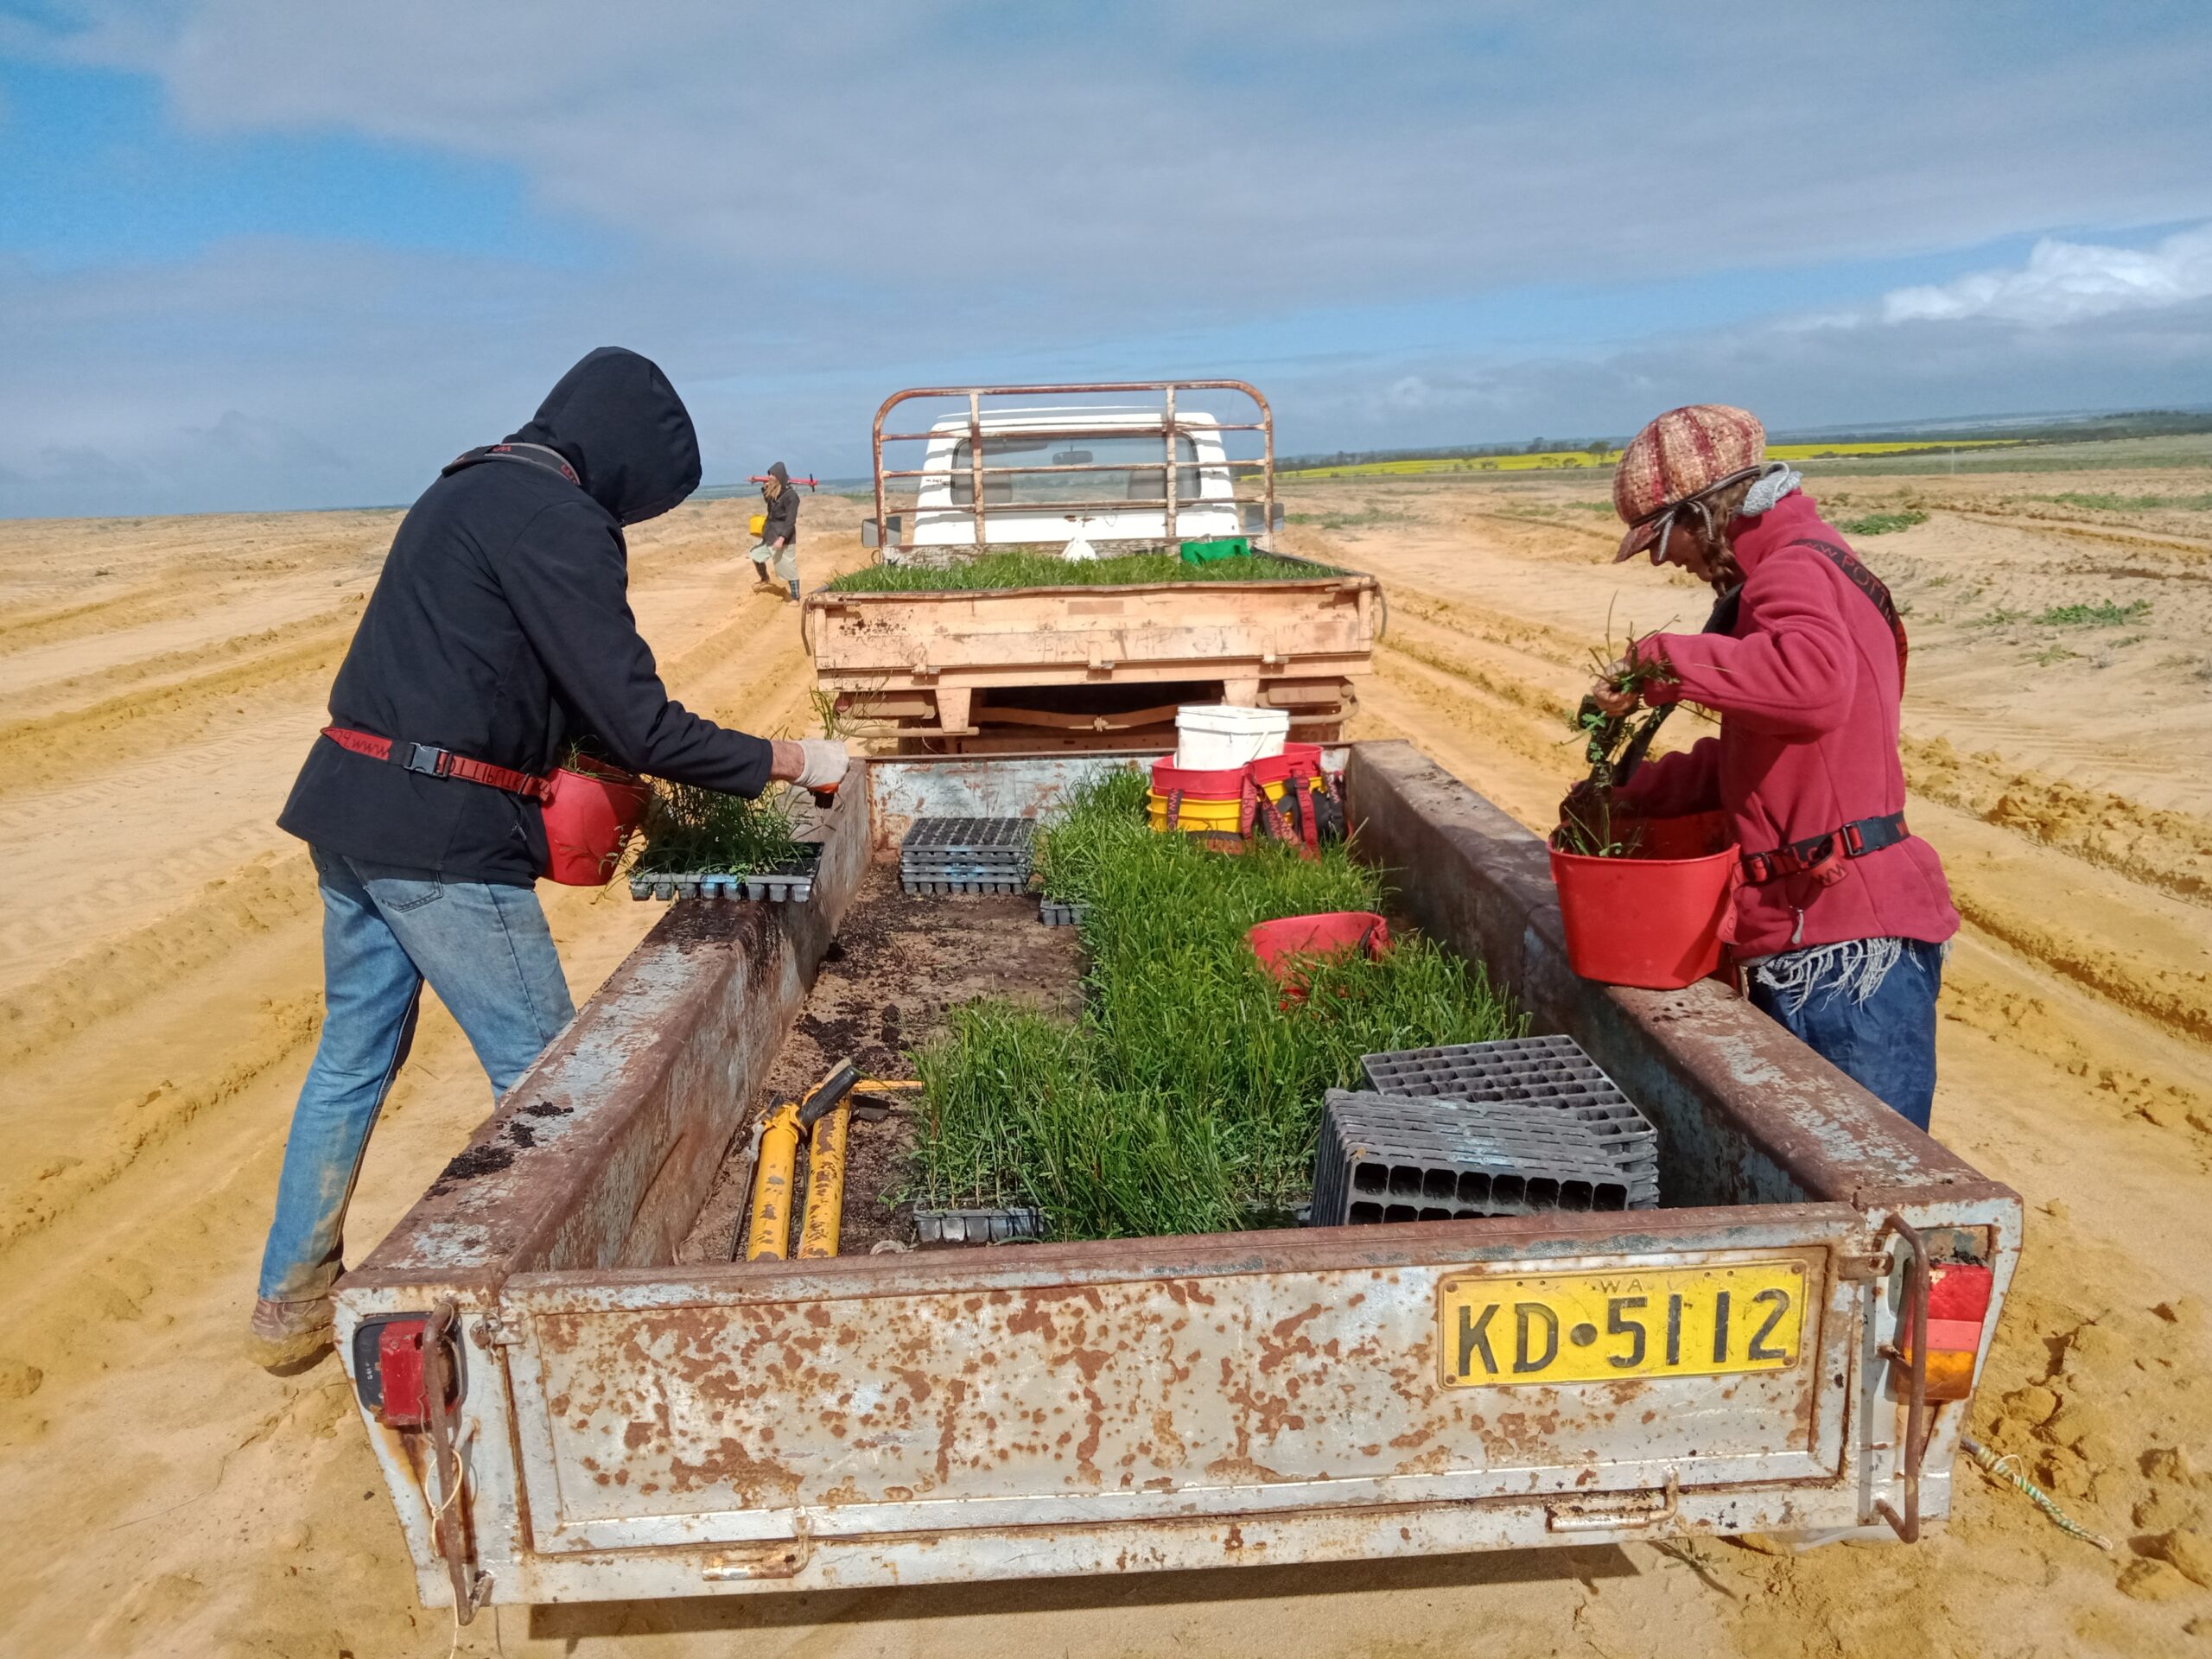 Two people on either side of a trailer filled with seedling trays